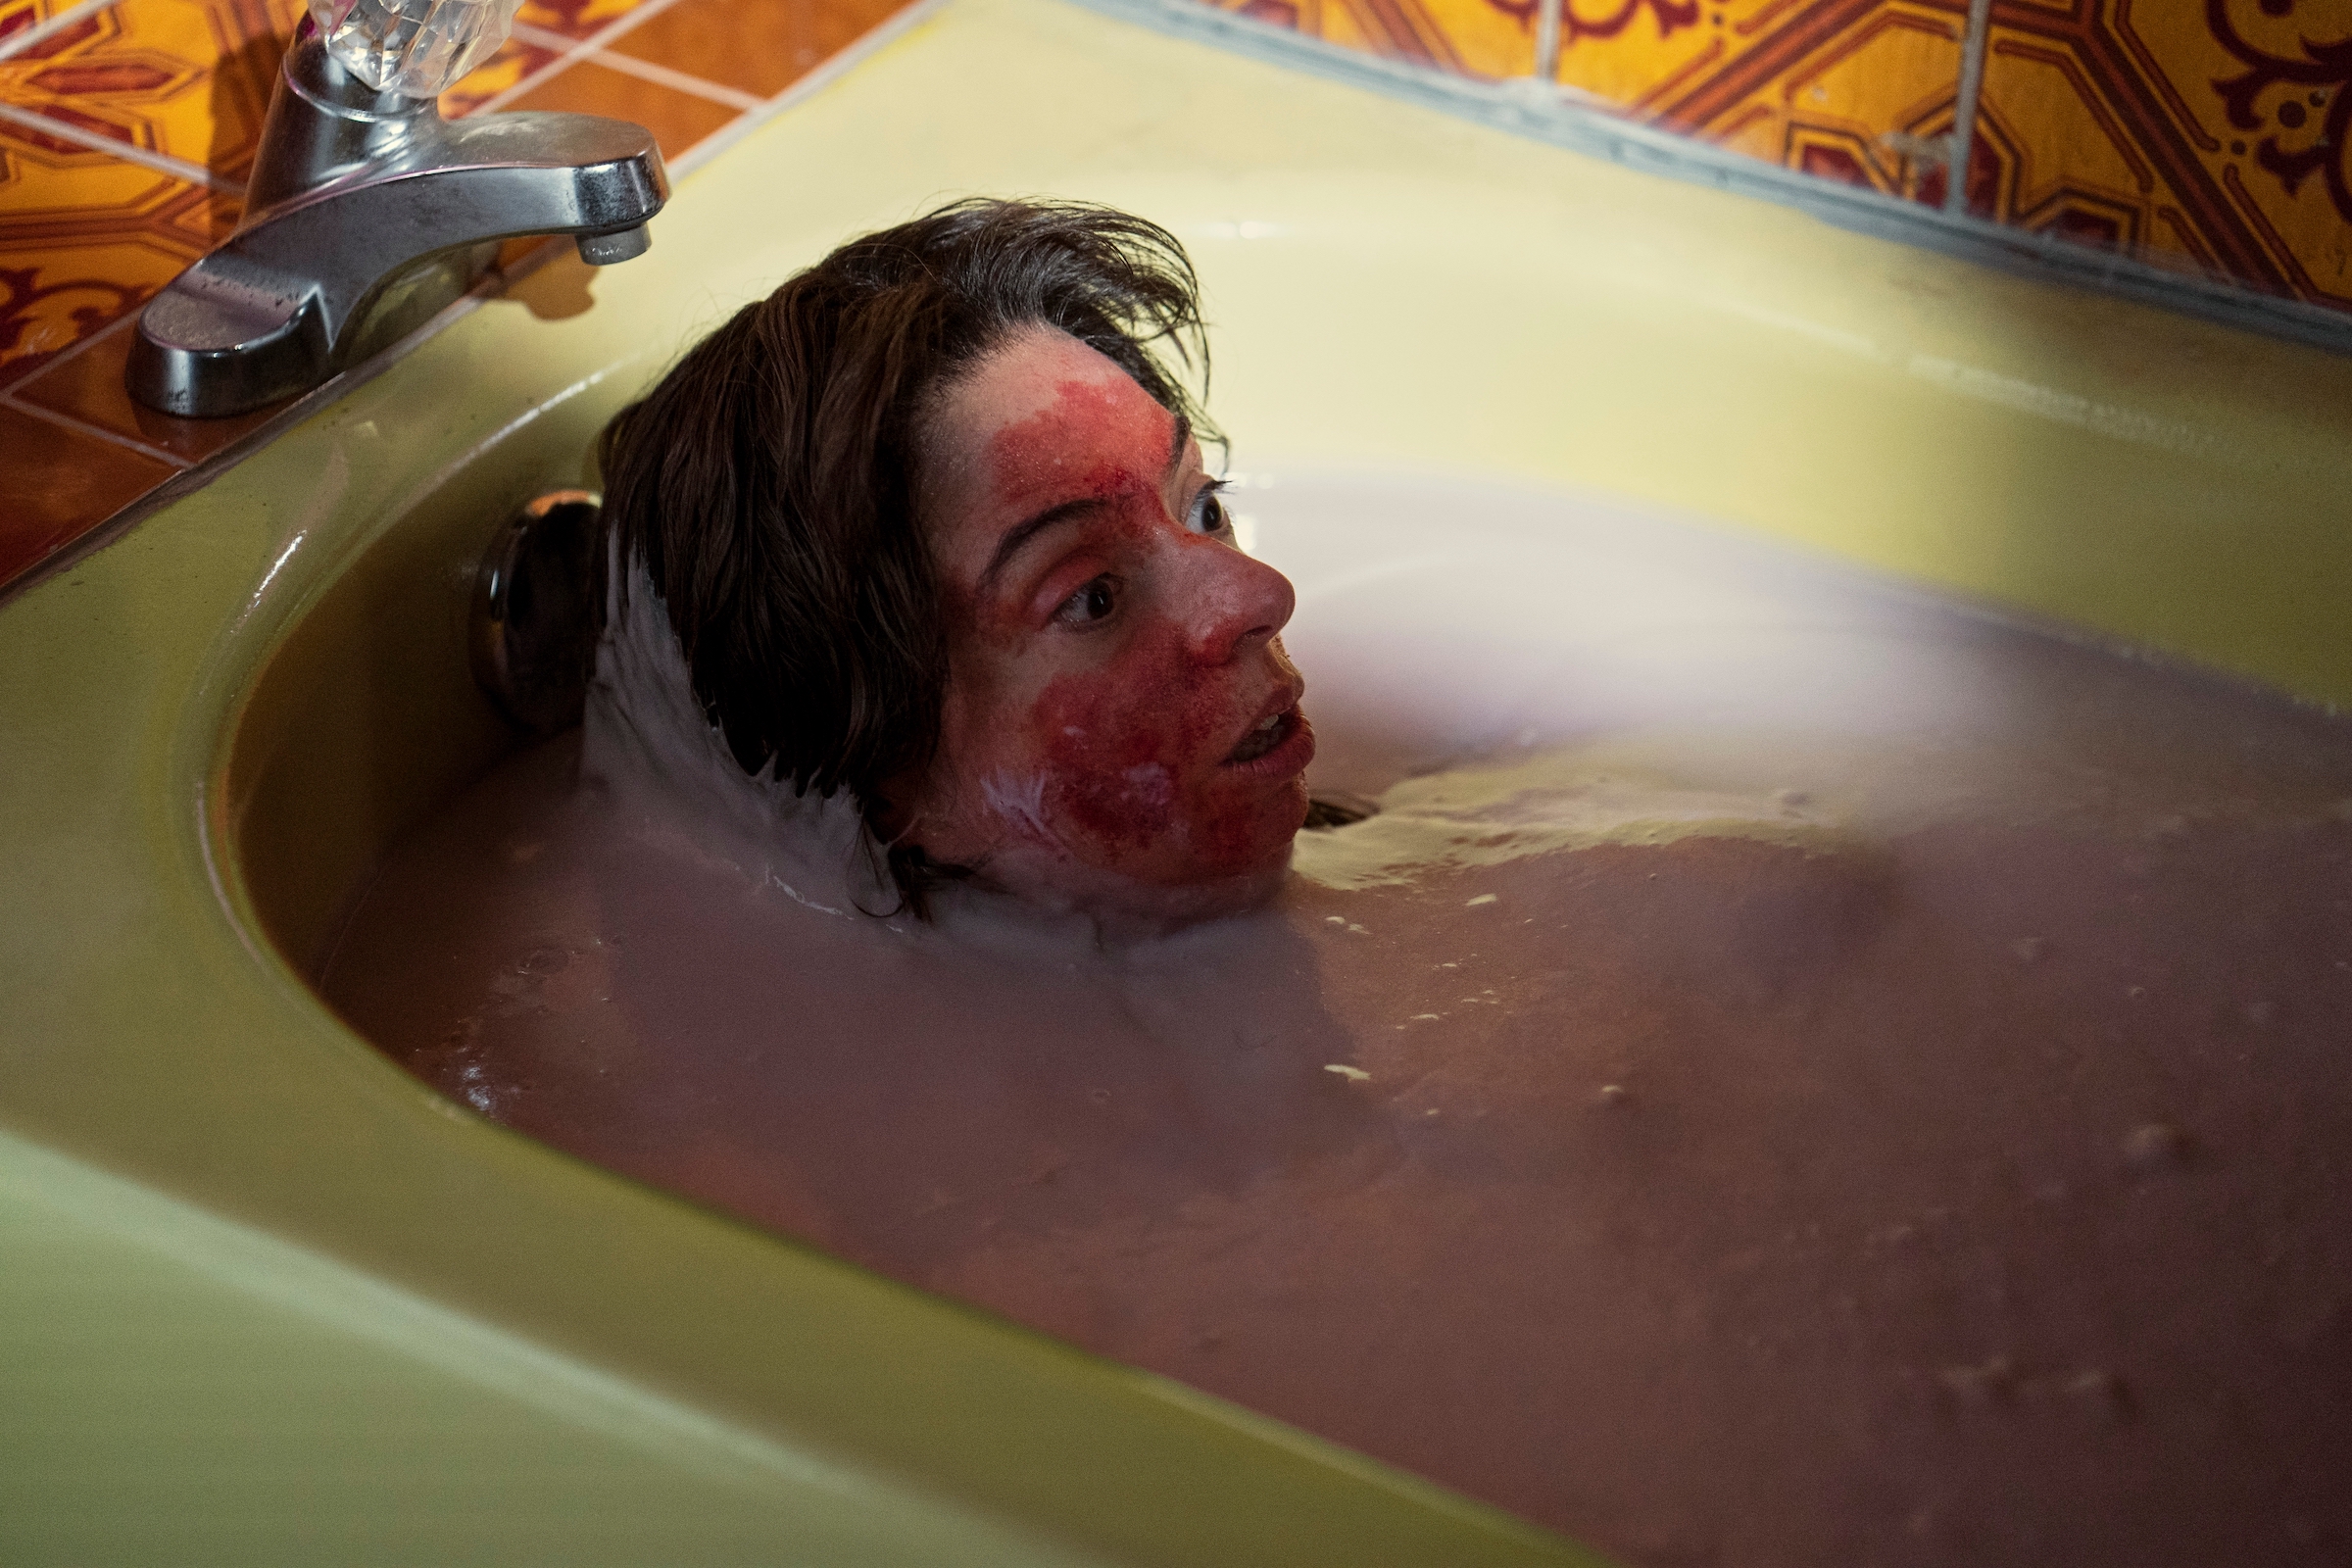 A woman with red smeared all across her face submerges herself in a thick pink bath, looking shocked